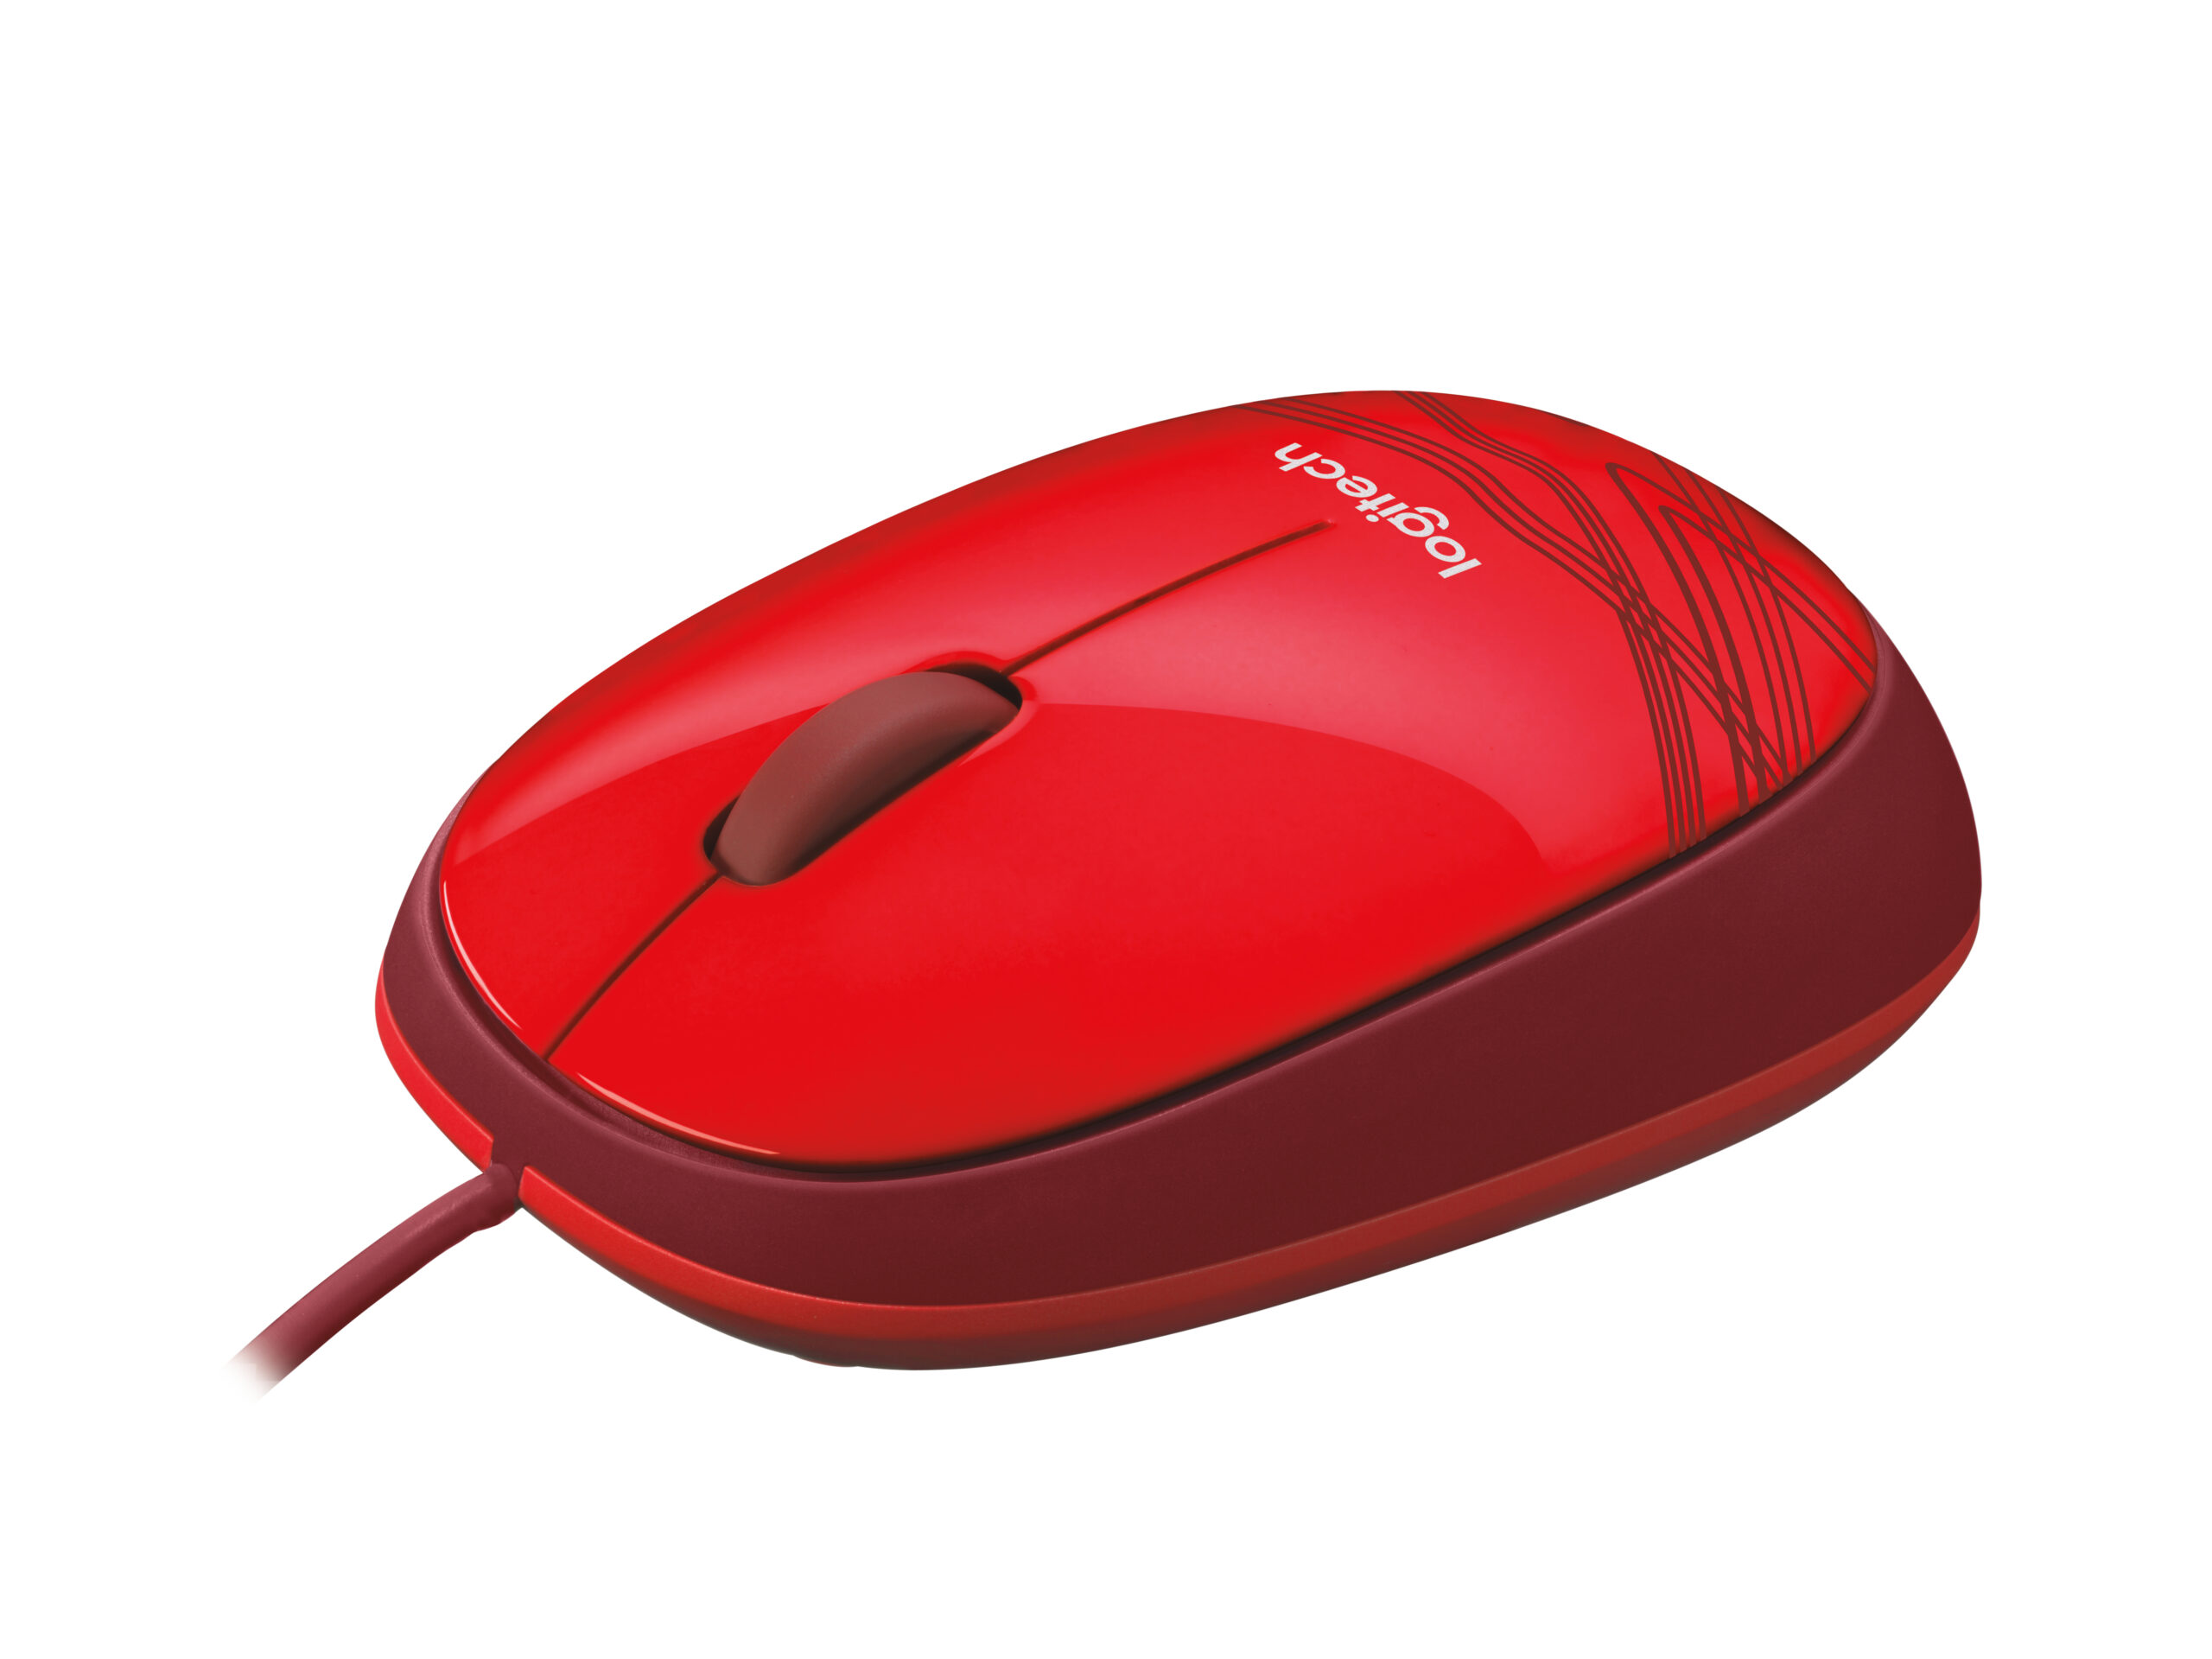 Corded Mouse M105 Red Logitech Input Devices 910 002945 5099206035744